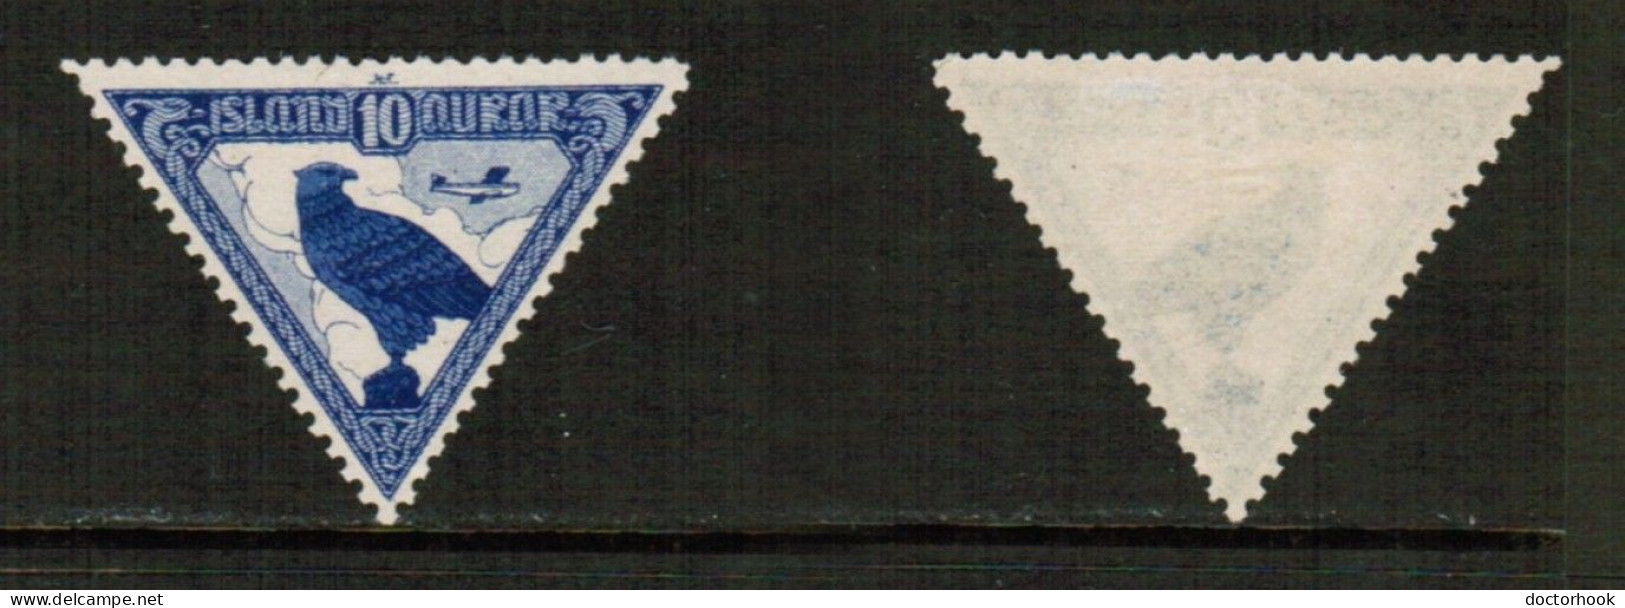 ICELAND   Scott # C 3* MINT HINGED (CONDITION AS PER SCAN) (Stamp Scan # 915-5) - Airmail